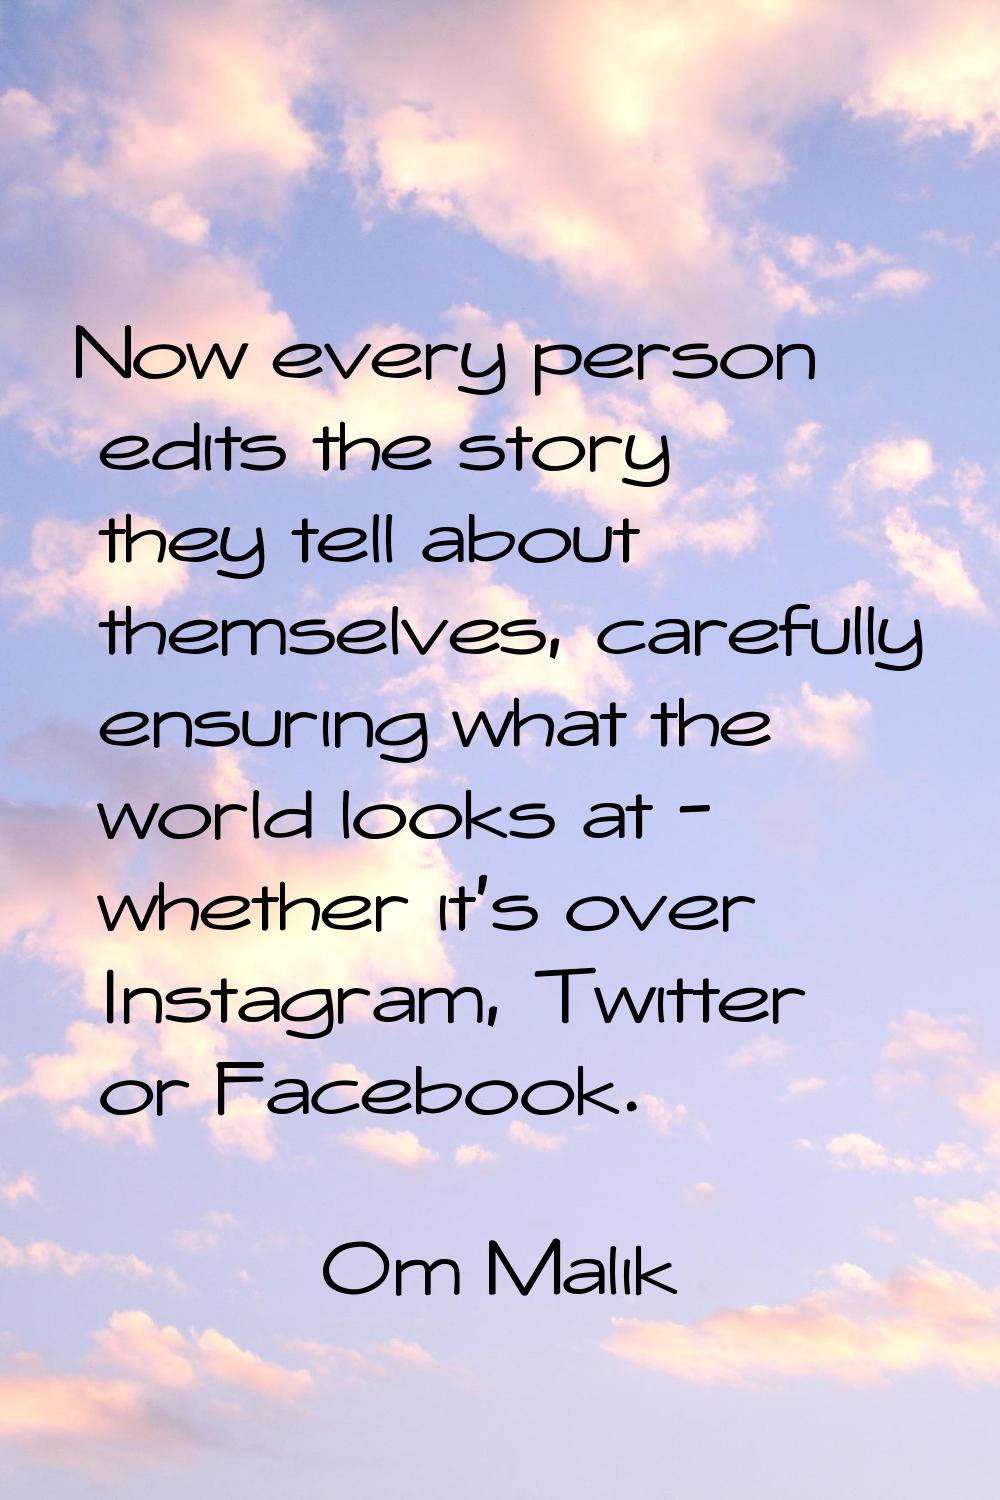 Now every person edits the story they tell about themselves, carefully ensuring what the world look